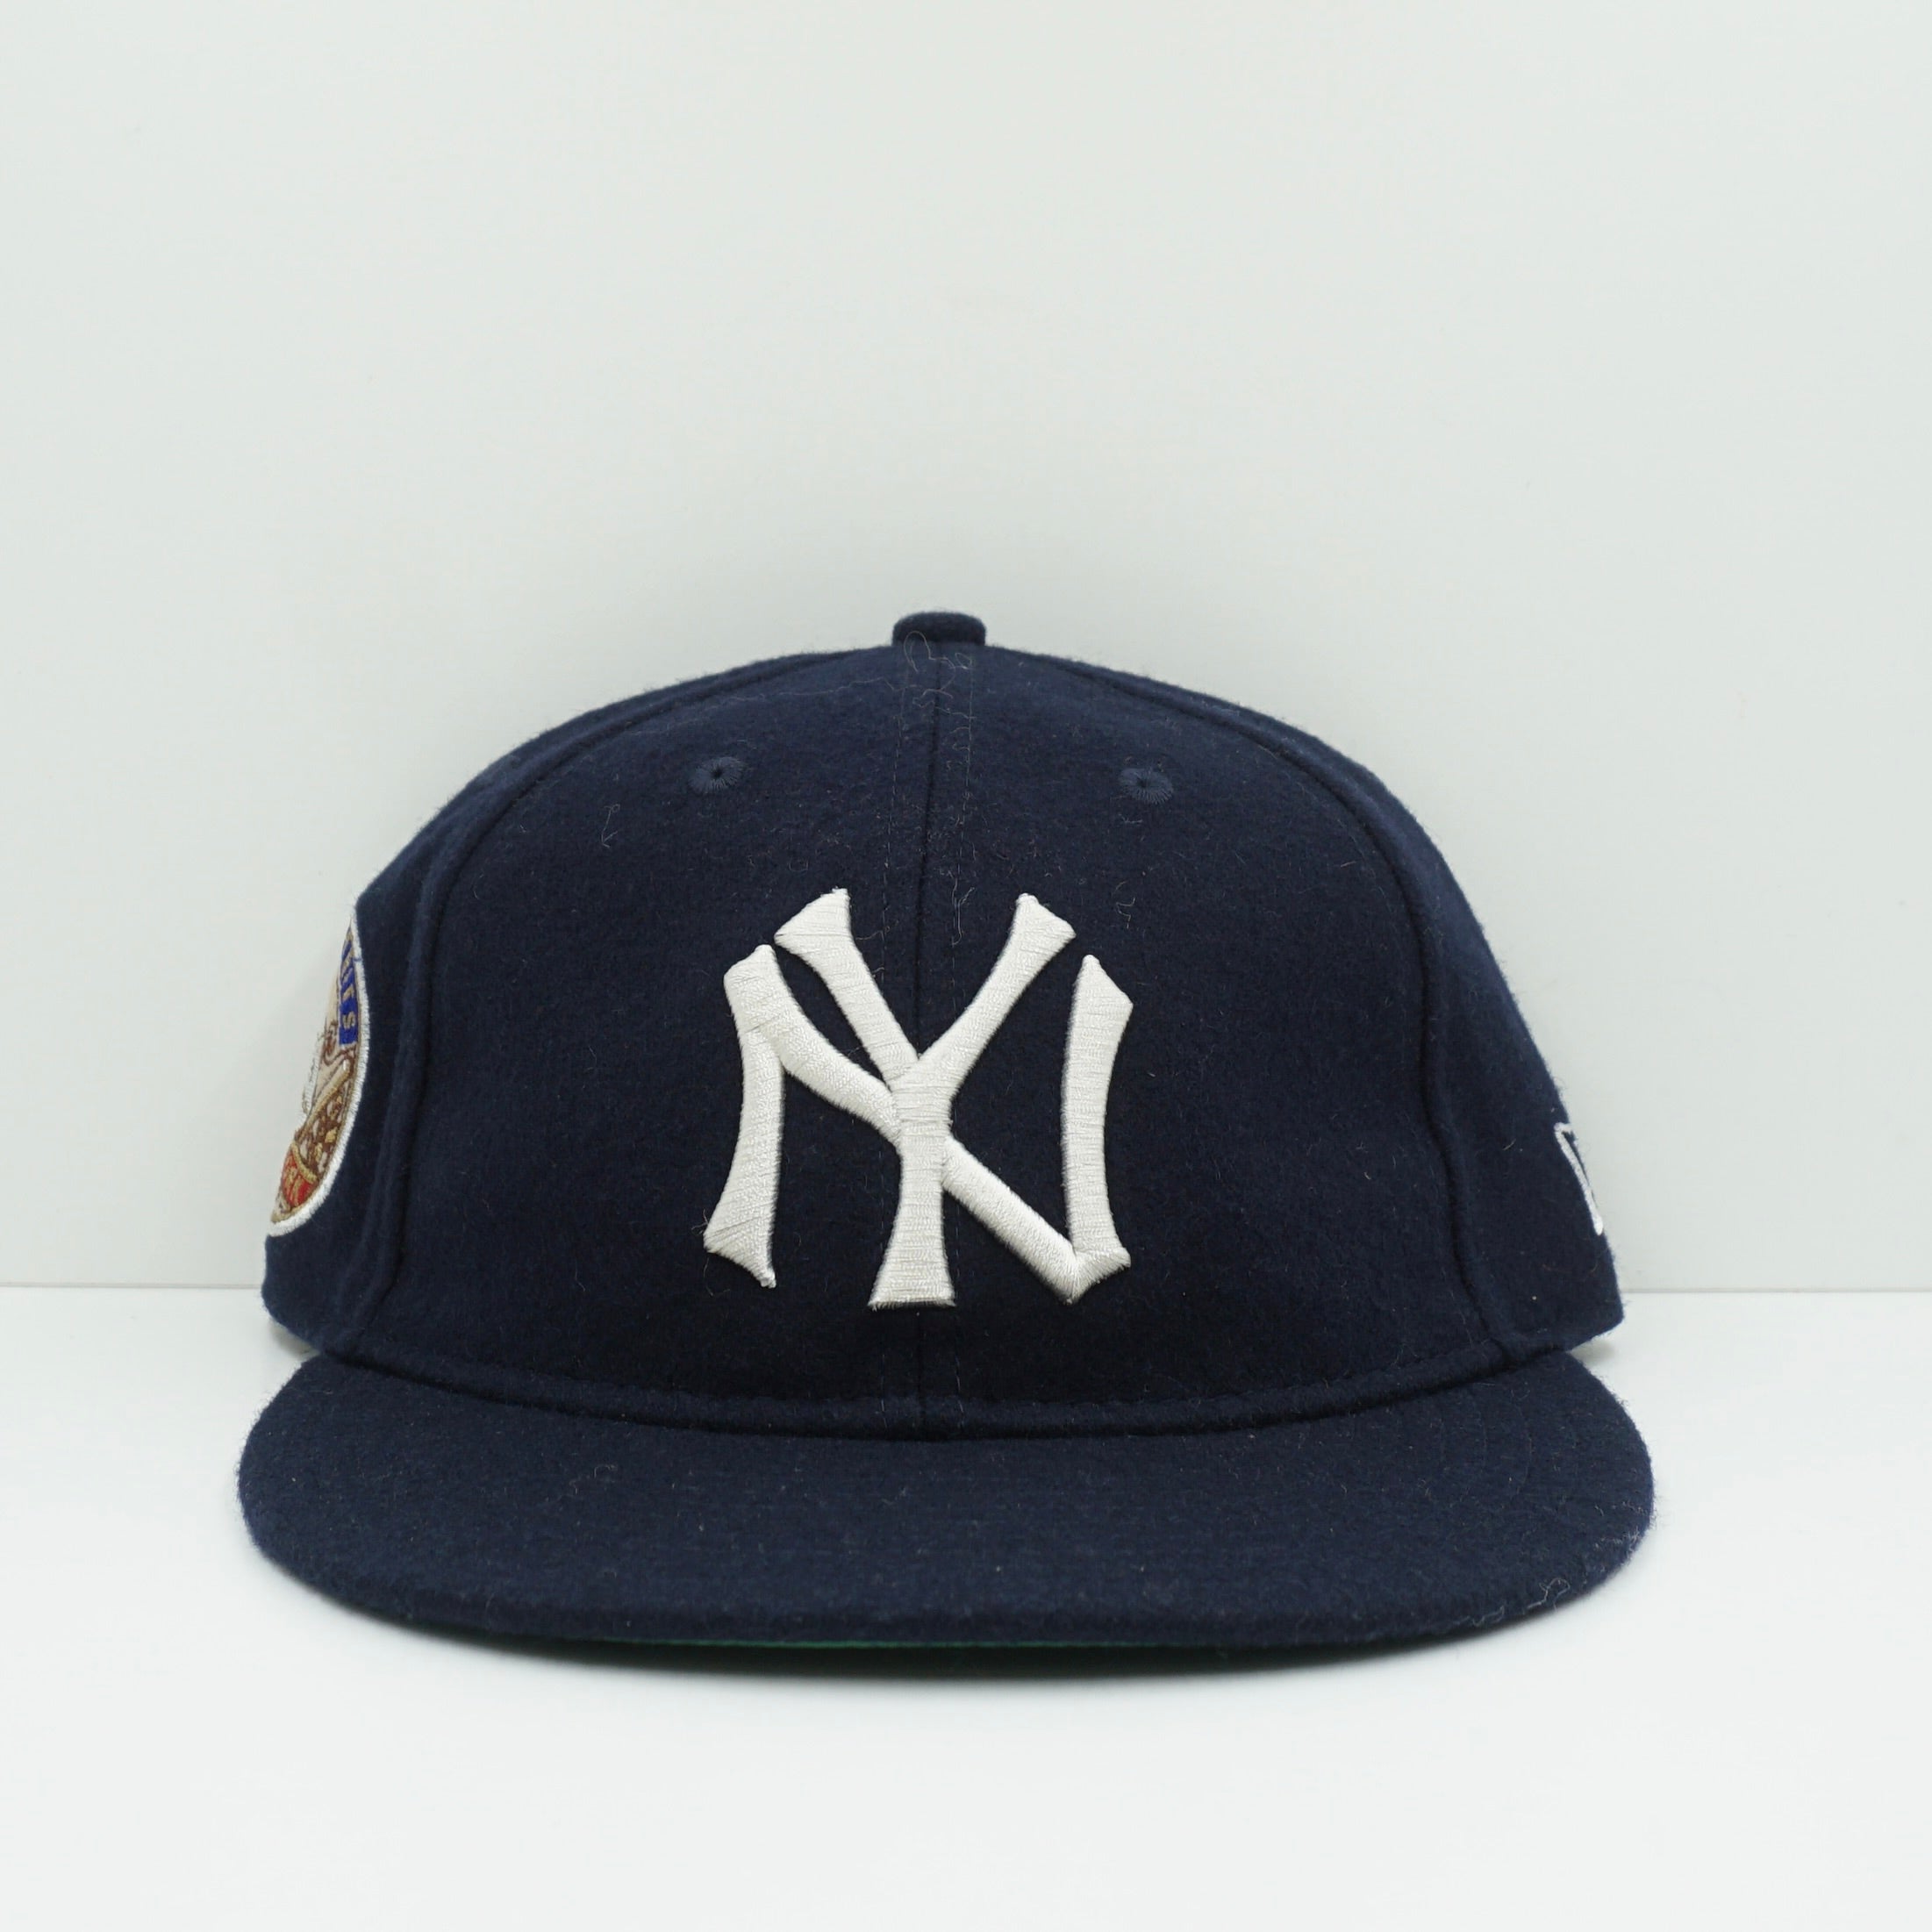 New Era Cooperstown New York Yankees Relaxed Heritage Fitted Cap